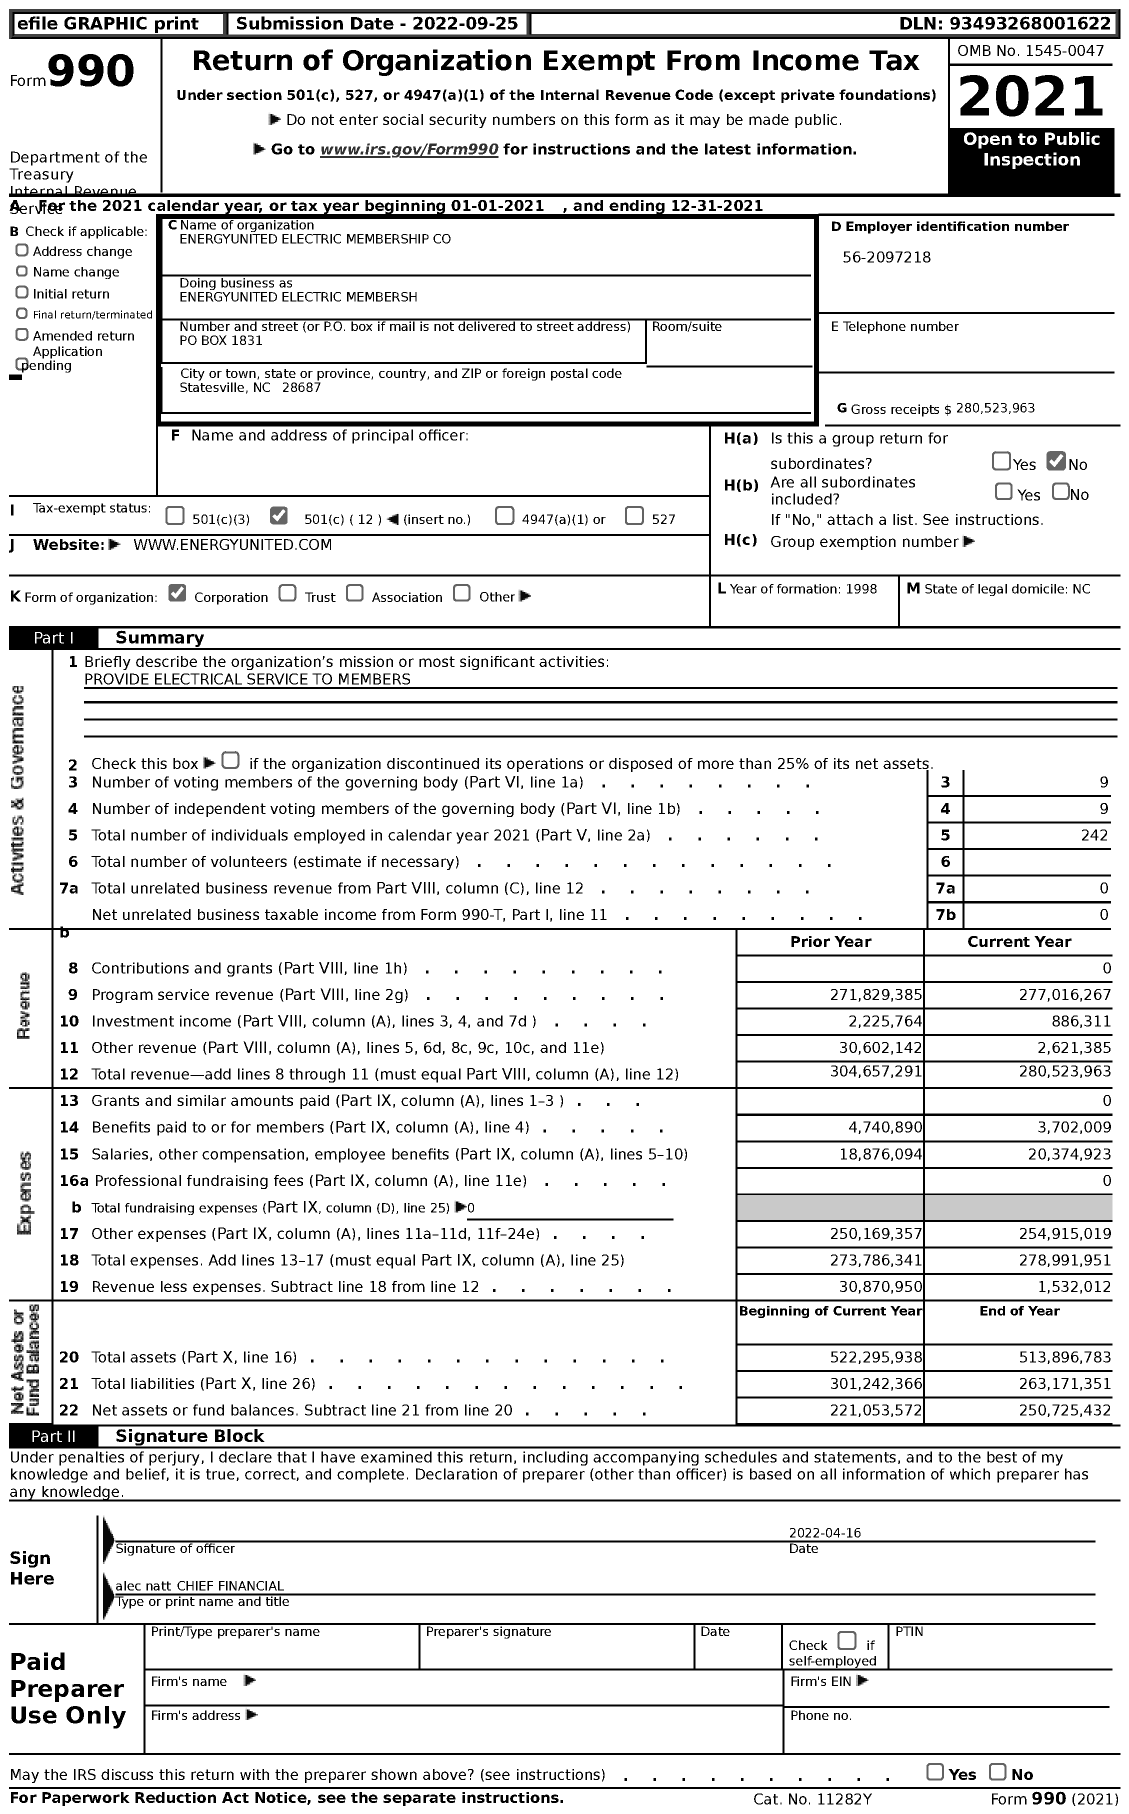 Image of first page of 2021 Form 990 for Energyunited Electric Membership Corporation